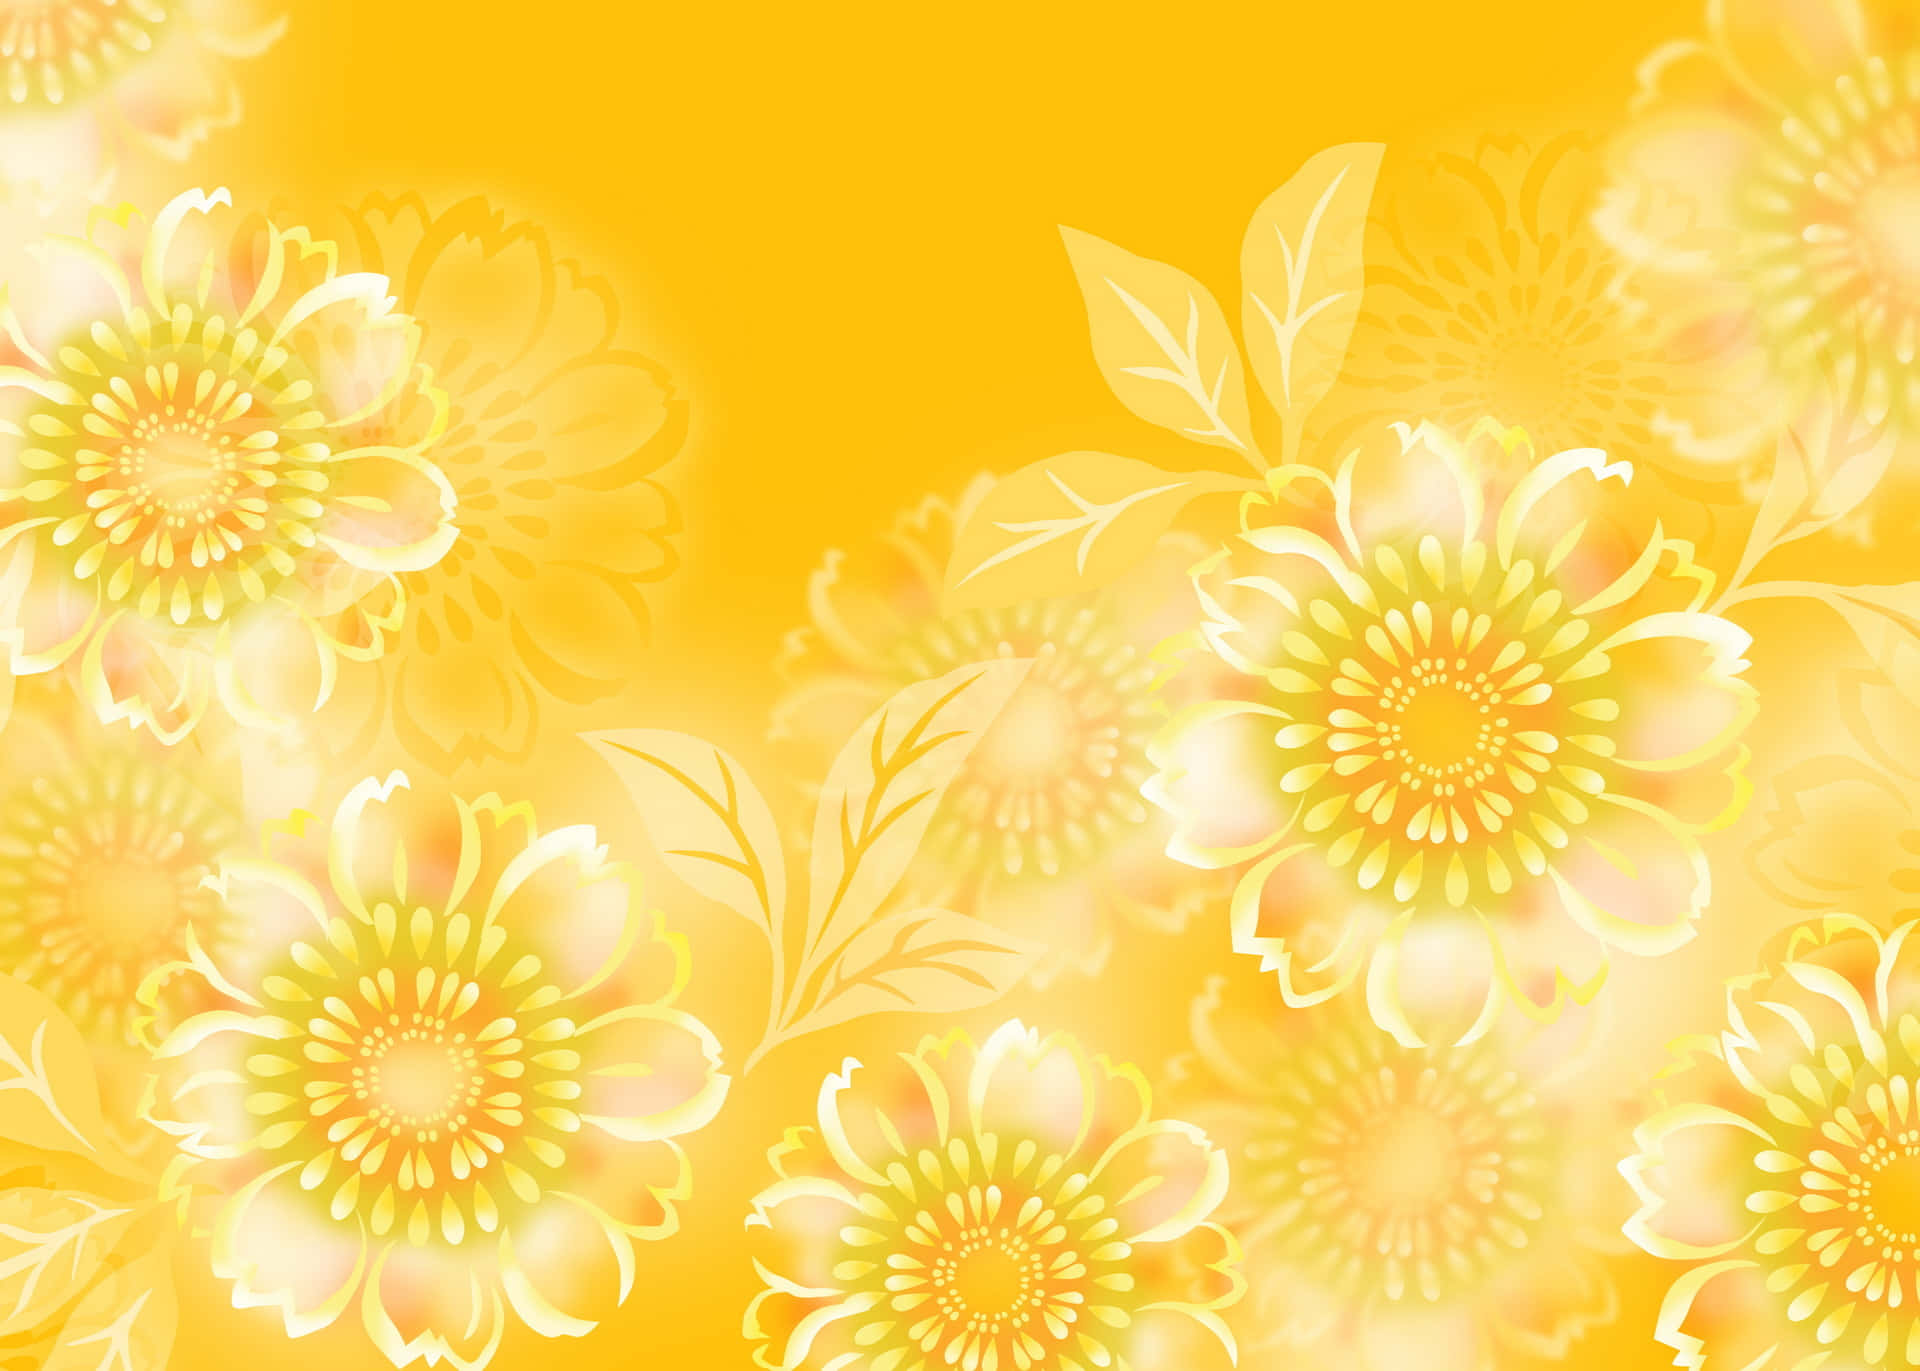 A bright and cheery yellow flower, basking in the sunlight Wallpaper